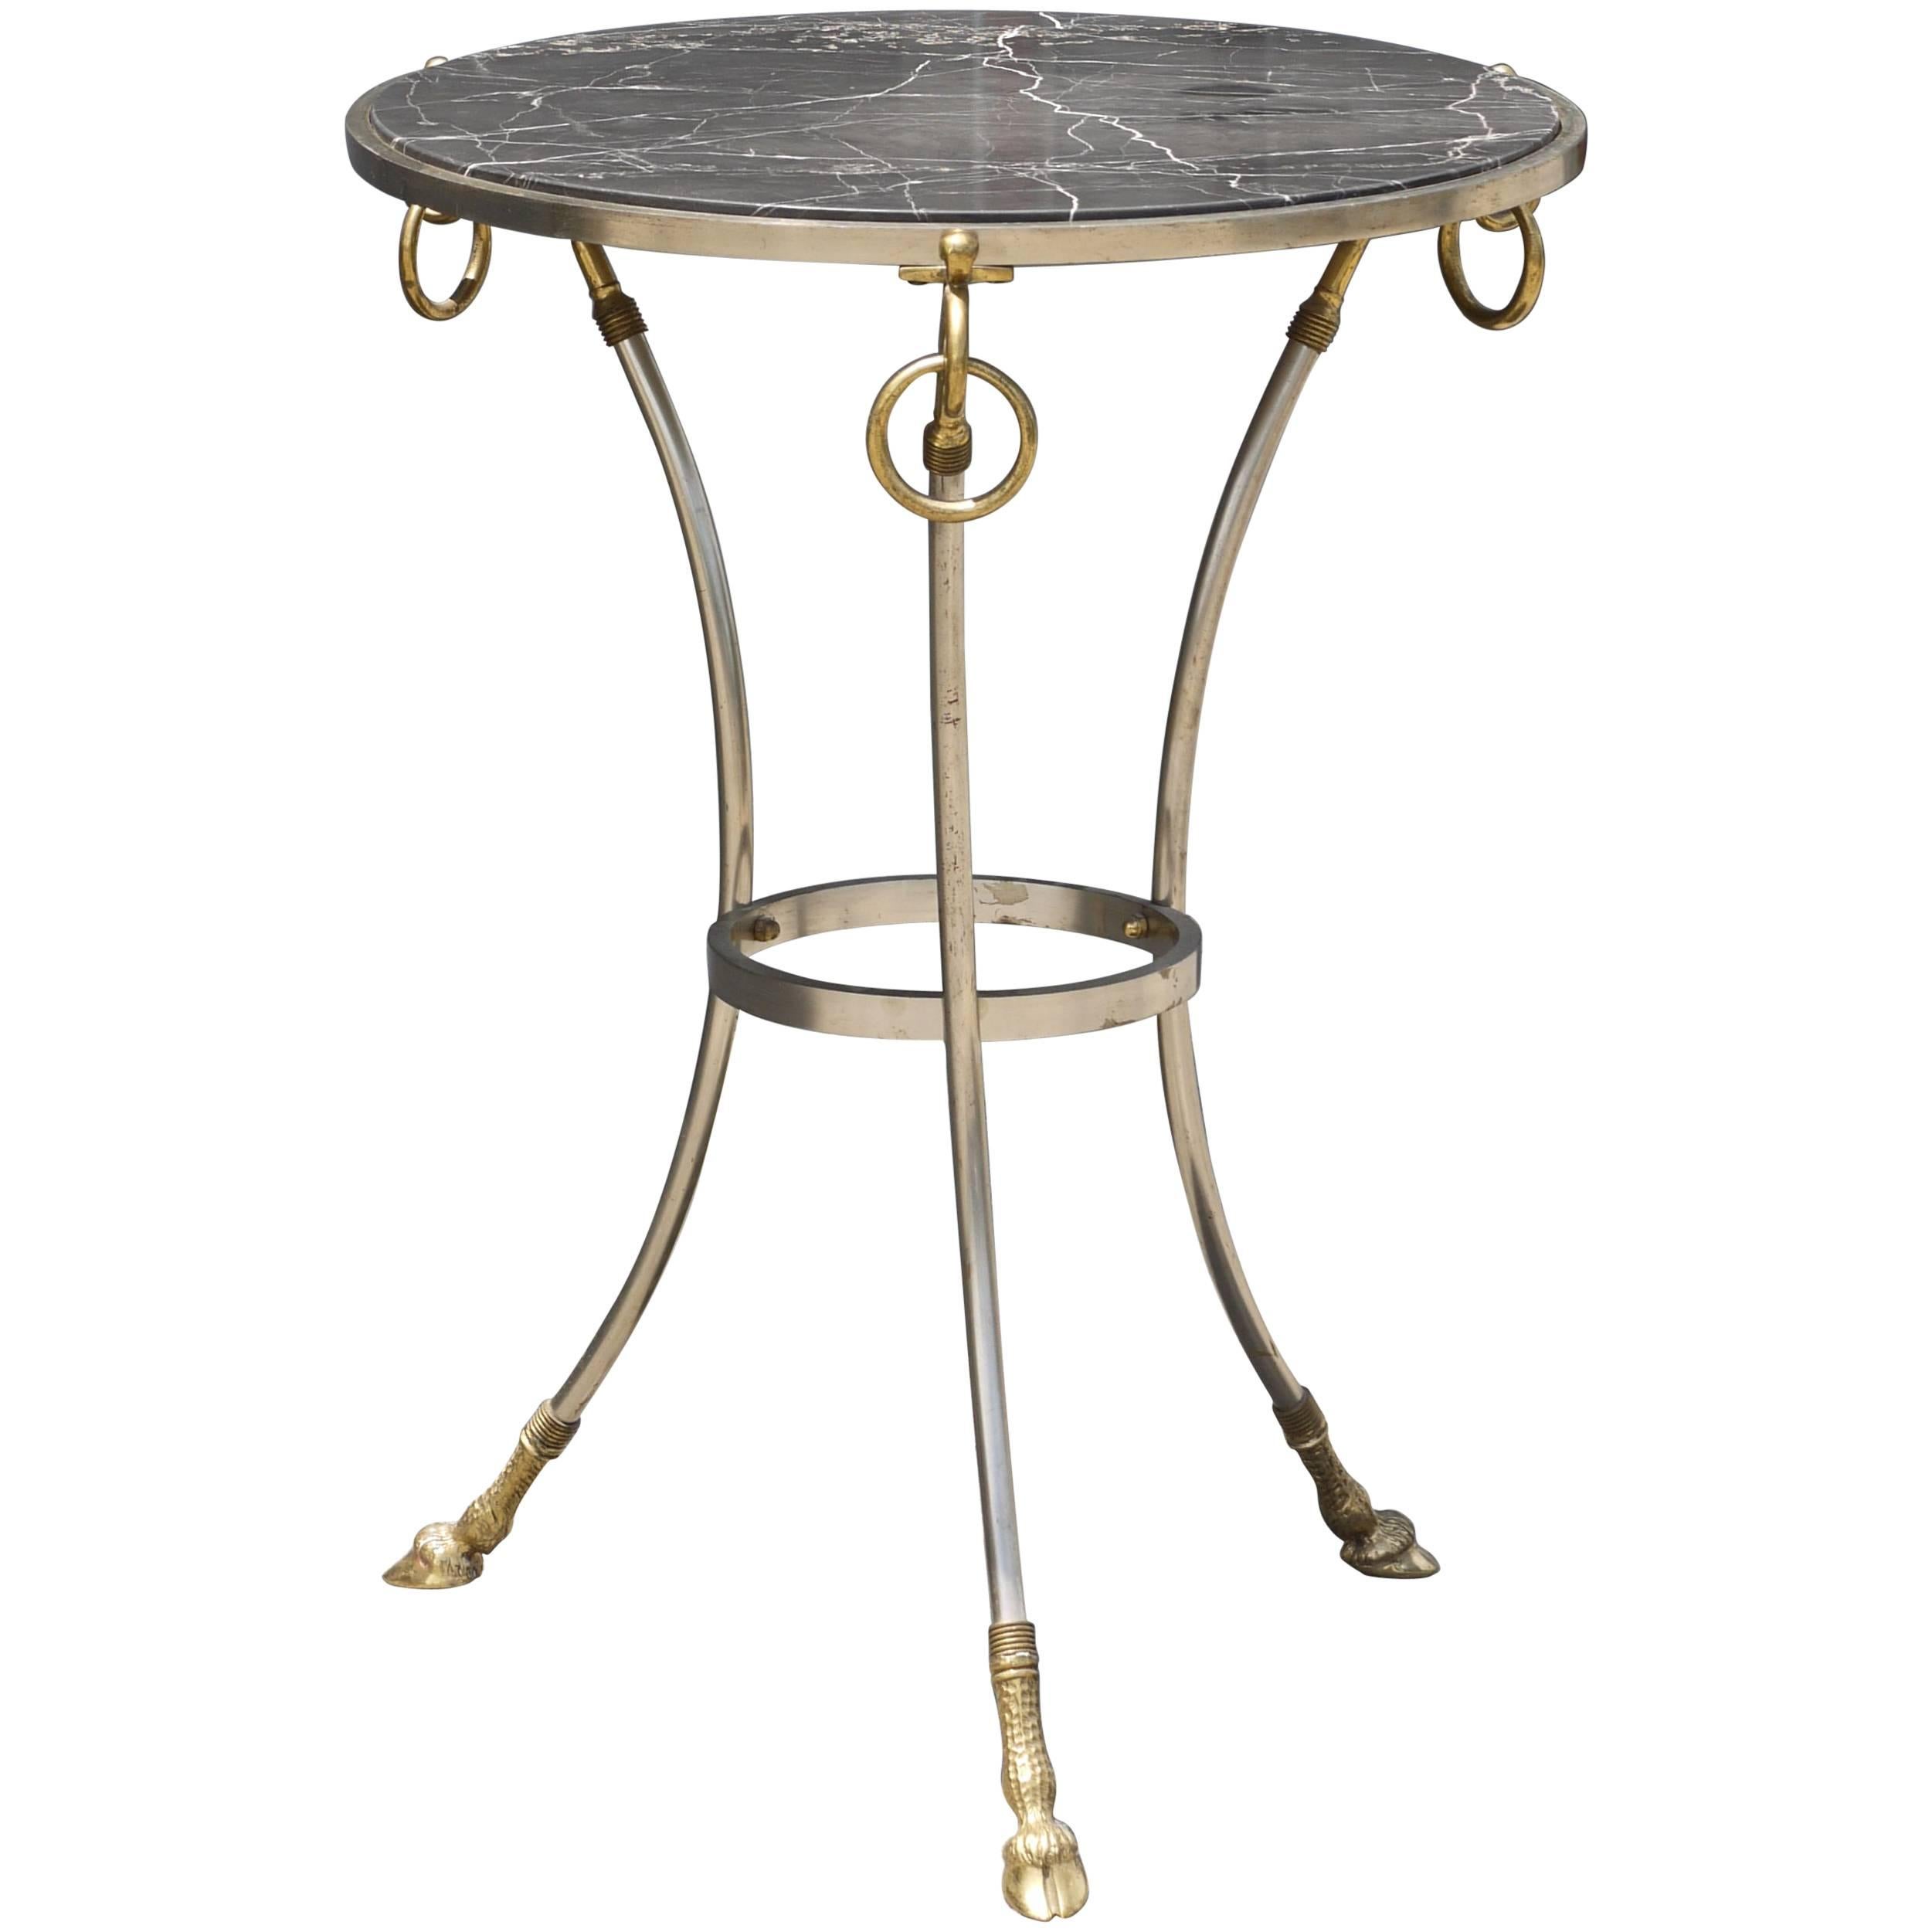 Neoclassical Italian Tripod Table in Brushed Nickel and Brass